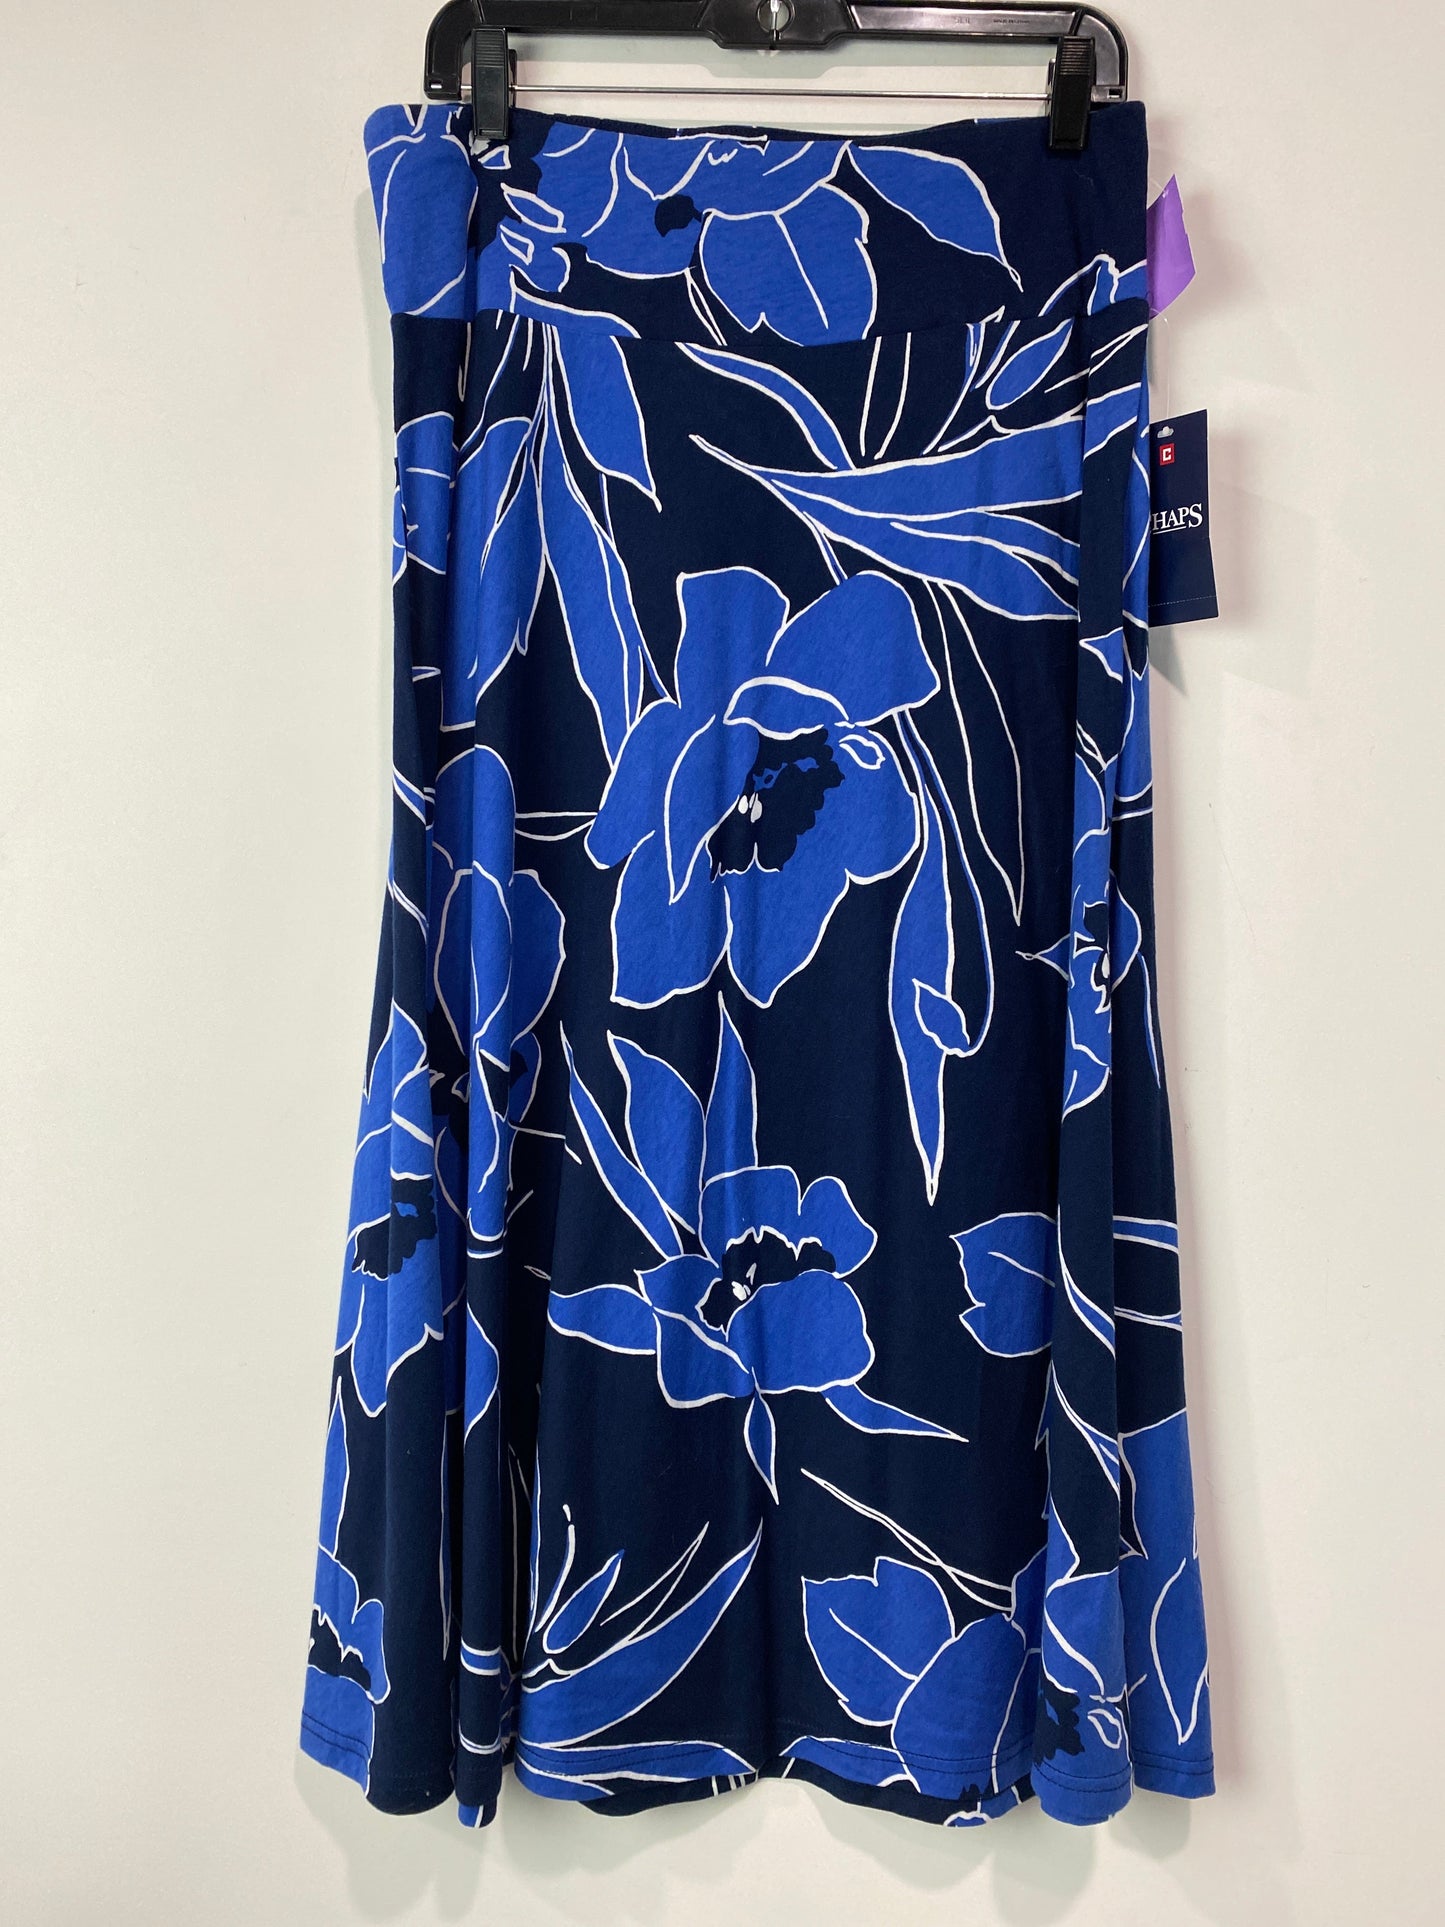 Skirt Maxi By Chaps  Size: M